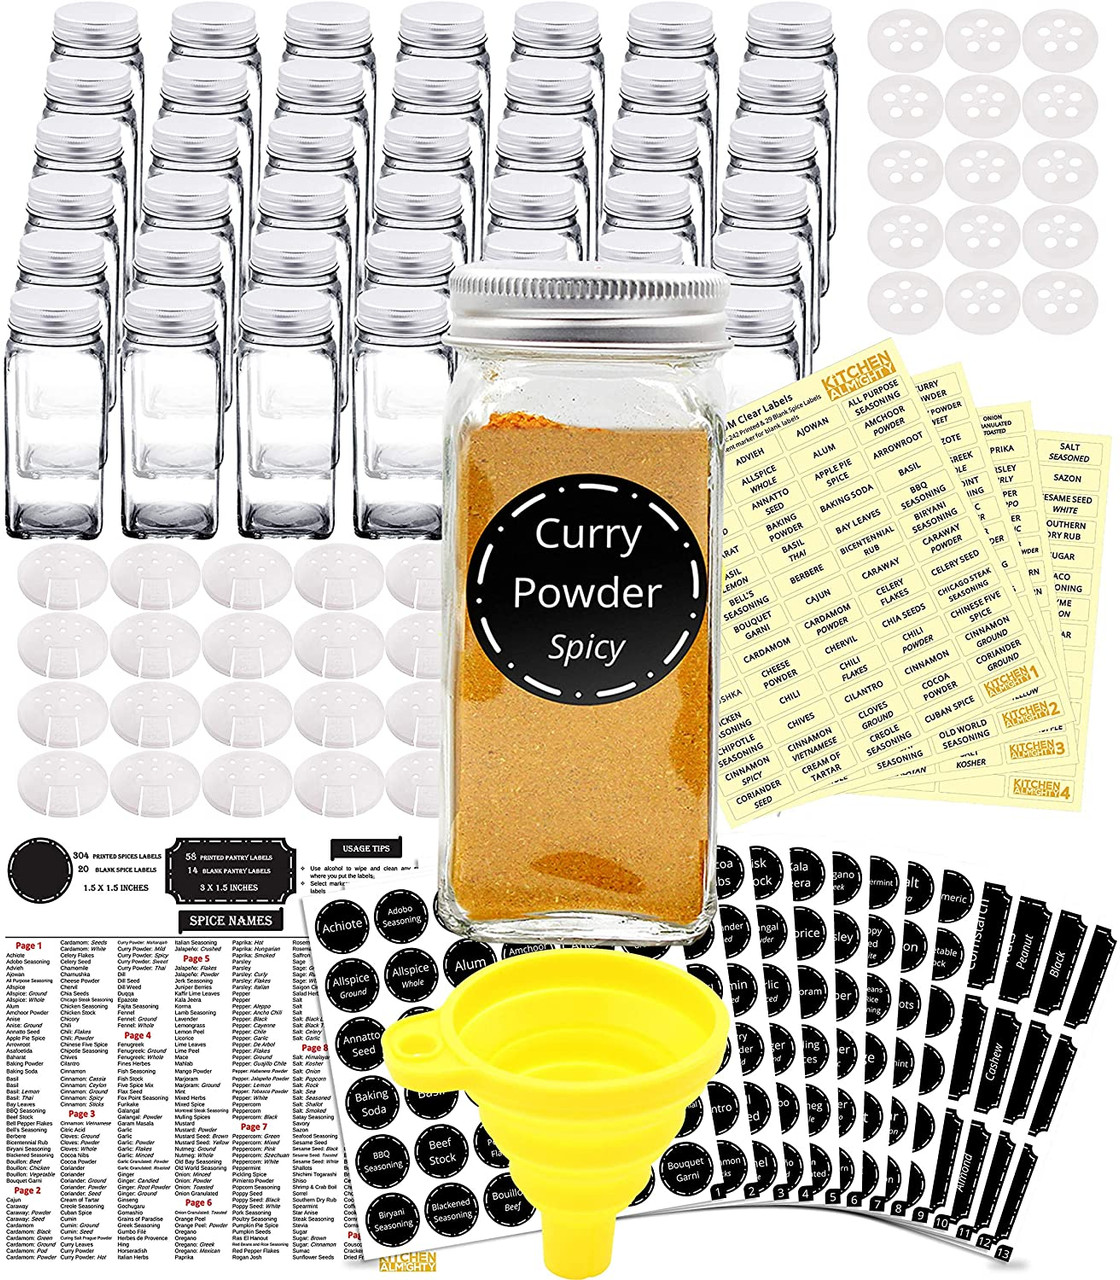 Premium Vials, 4oz, BEST VALUE 14 Glass Spice Jars includes pre-printed  Spice Labels. 14 Square Empty Jars, Airtight Cap, Chalkboard & Clear Label,  kitchen Funnel Pour/Sift Shakers